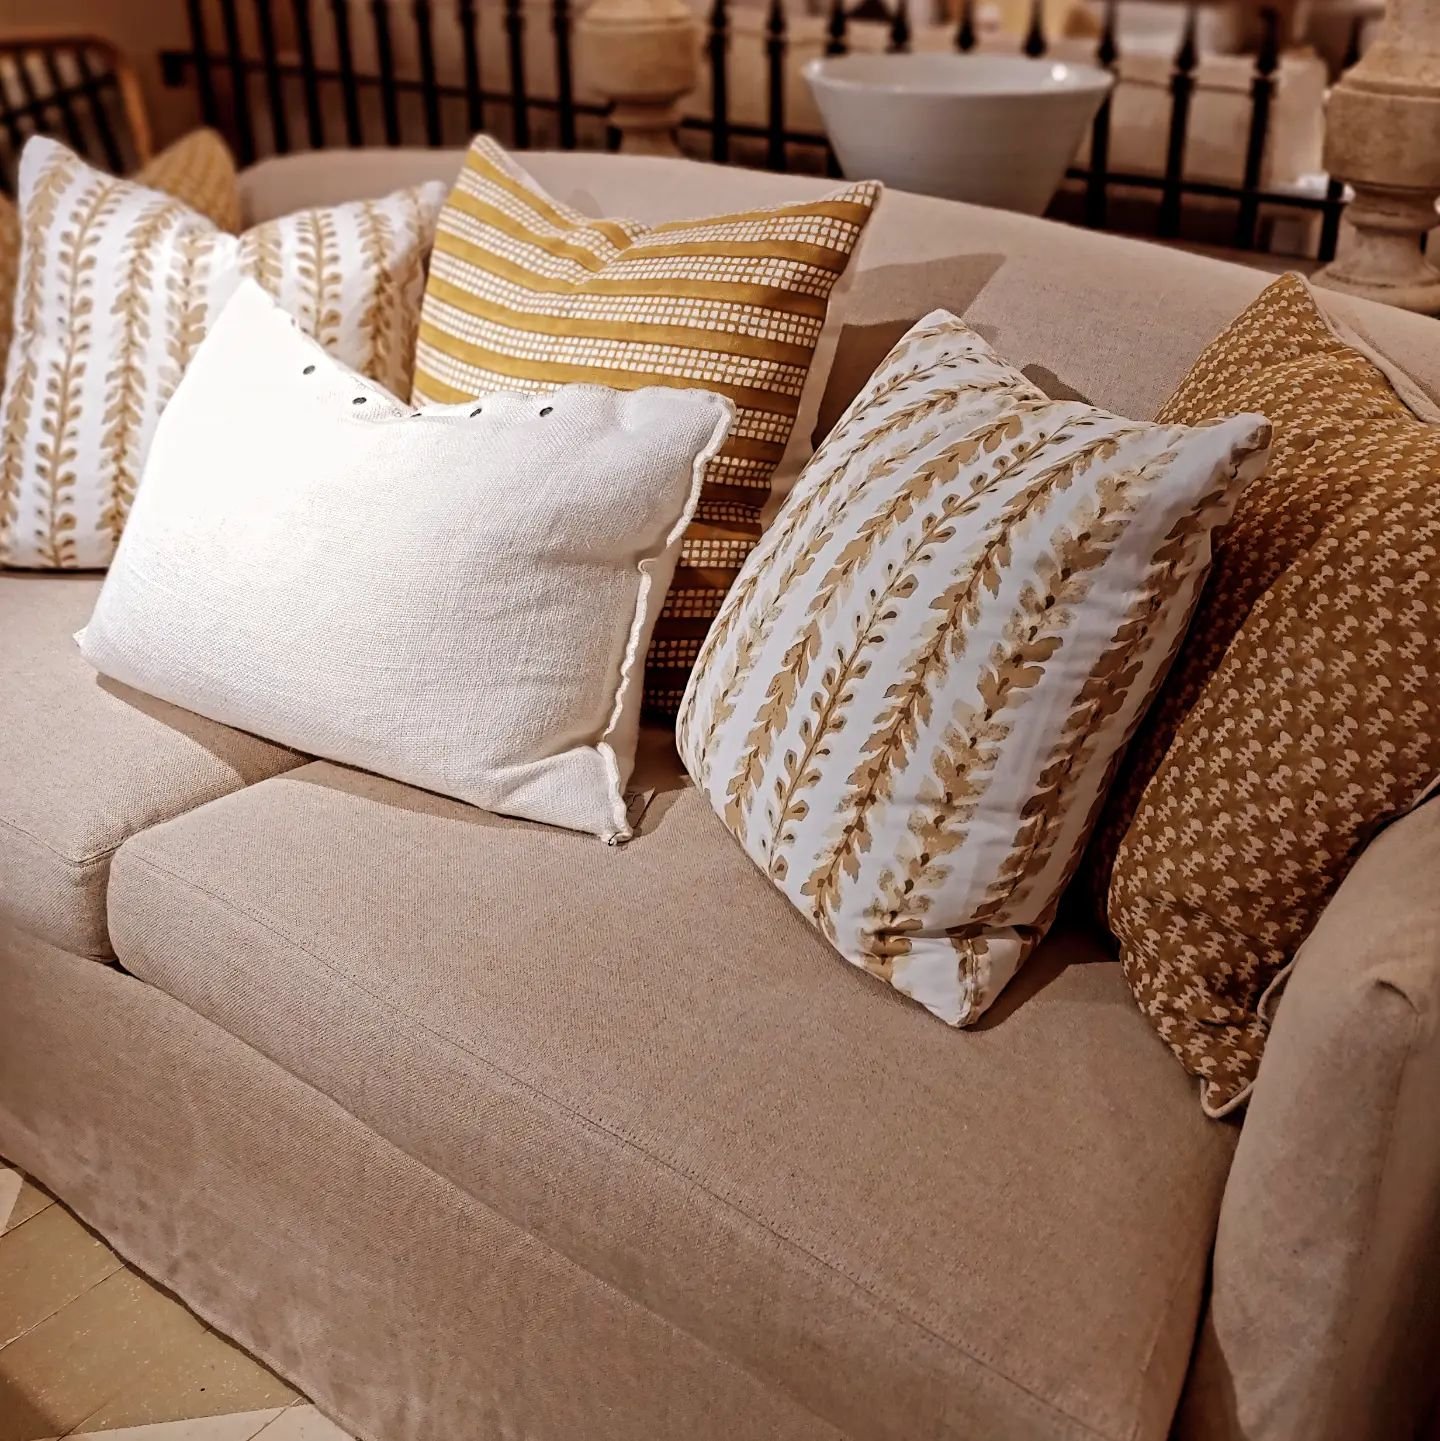 More of our gorgeous pillows on a beautiful hemp sofa!  Have you shopped with us lately?  Lots of new selections for your home!  #openeveryday #upholstery #instantgratification #mothersday #giftsforher #artisanmade #sustainable #38years #newprestonct